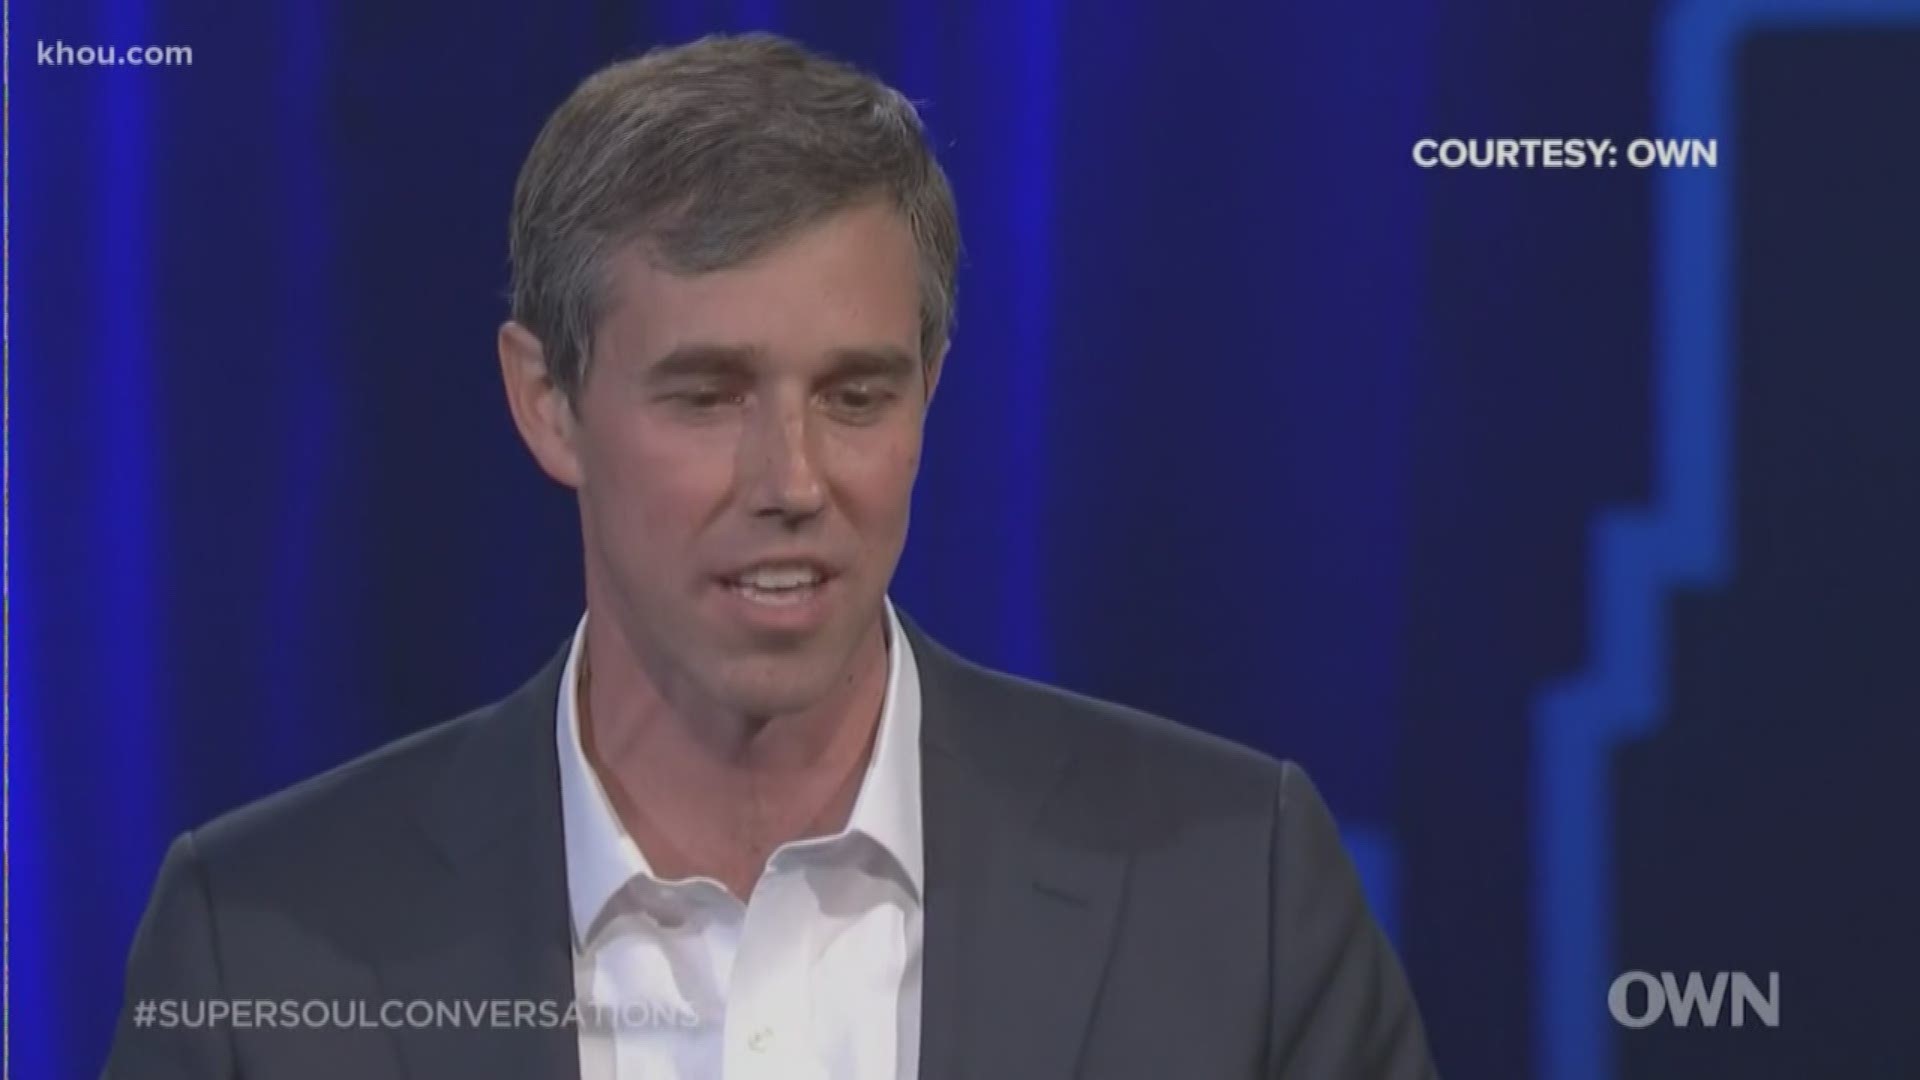 Former Texas Senate candidate Beto O'Rourke fanned the flames of a possible presidential run in a conversation with Oprah Winfrey.